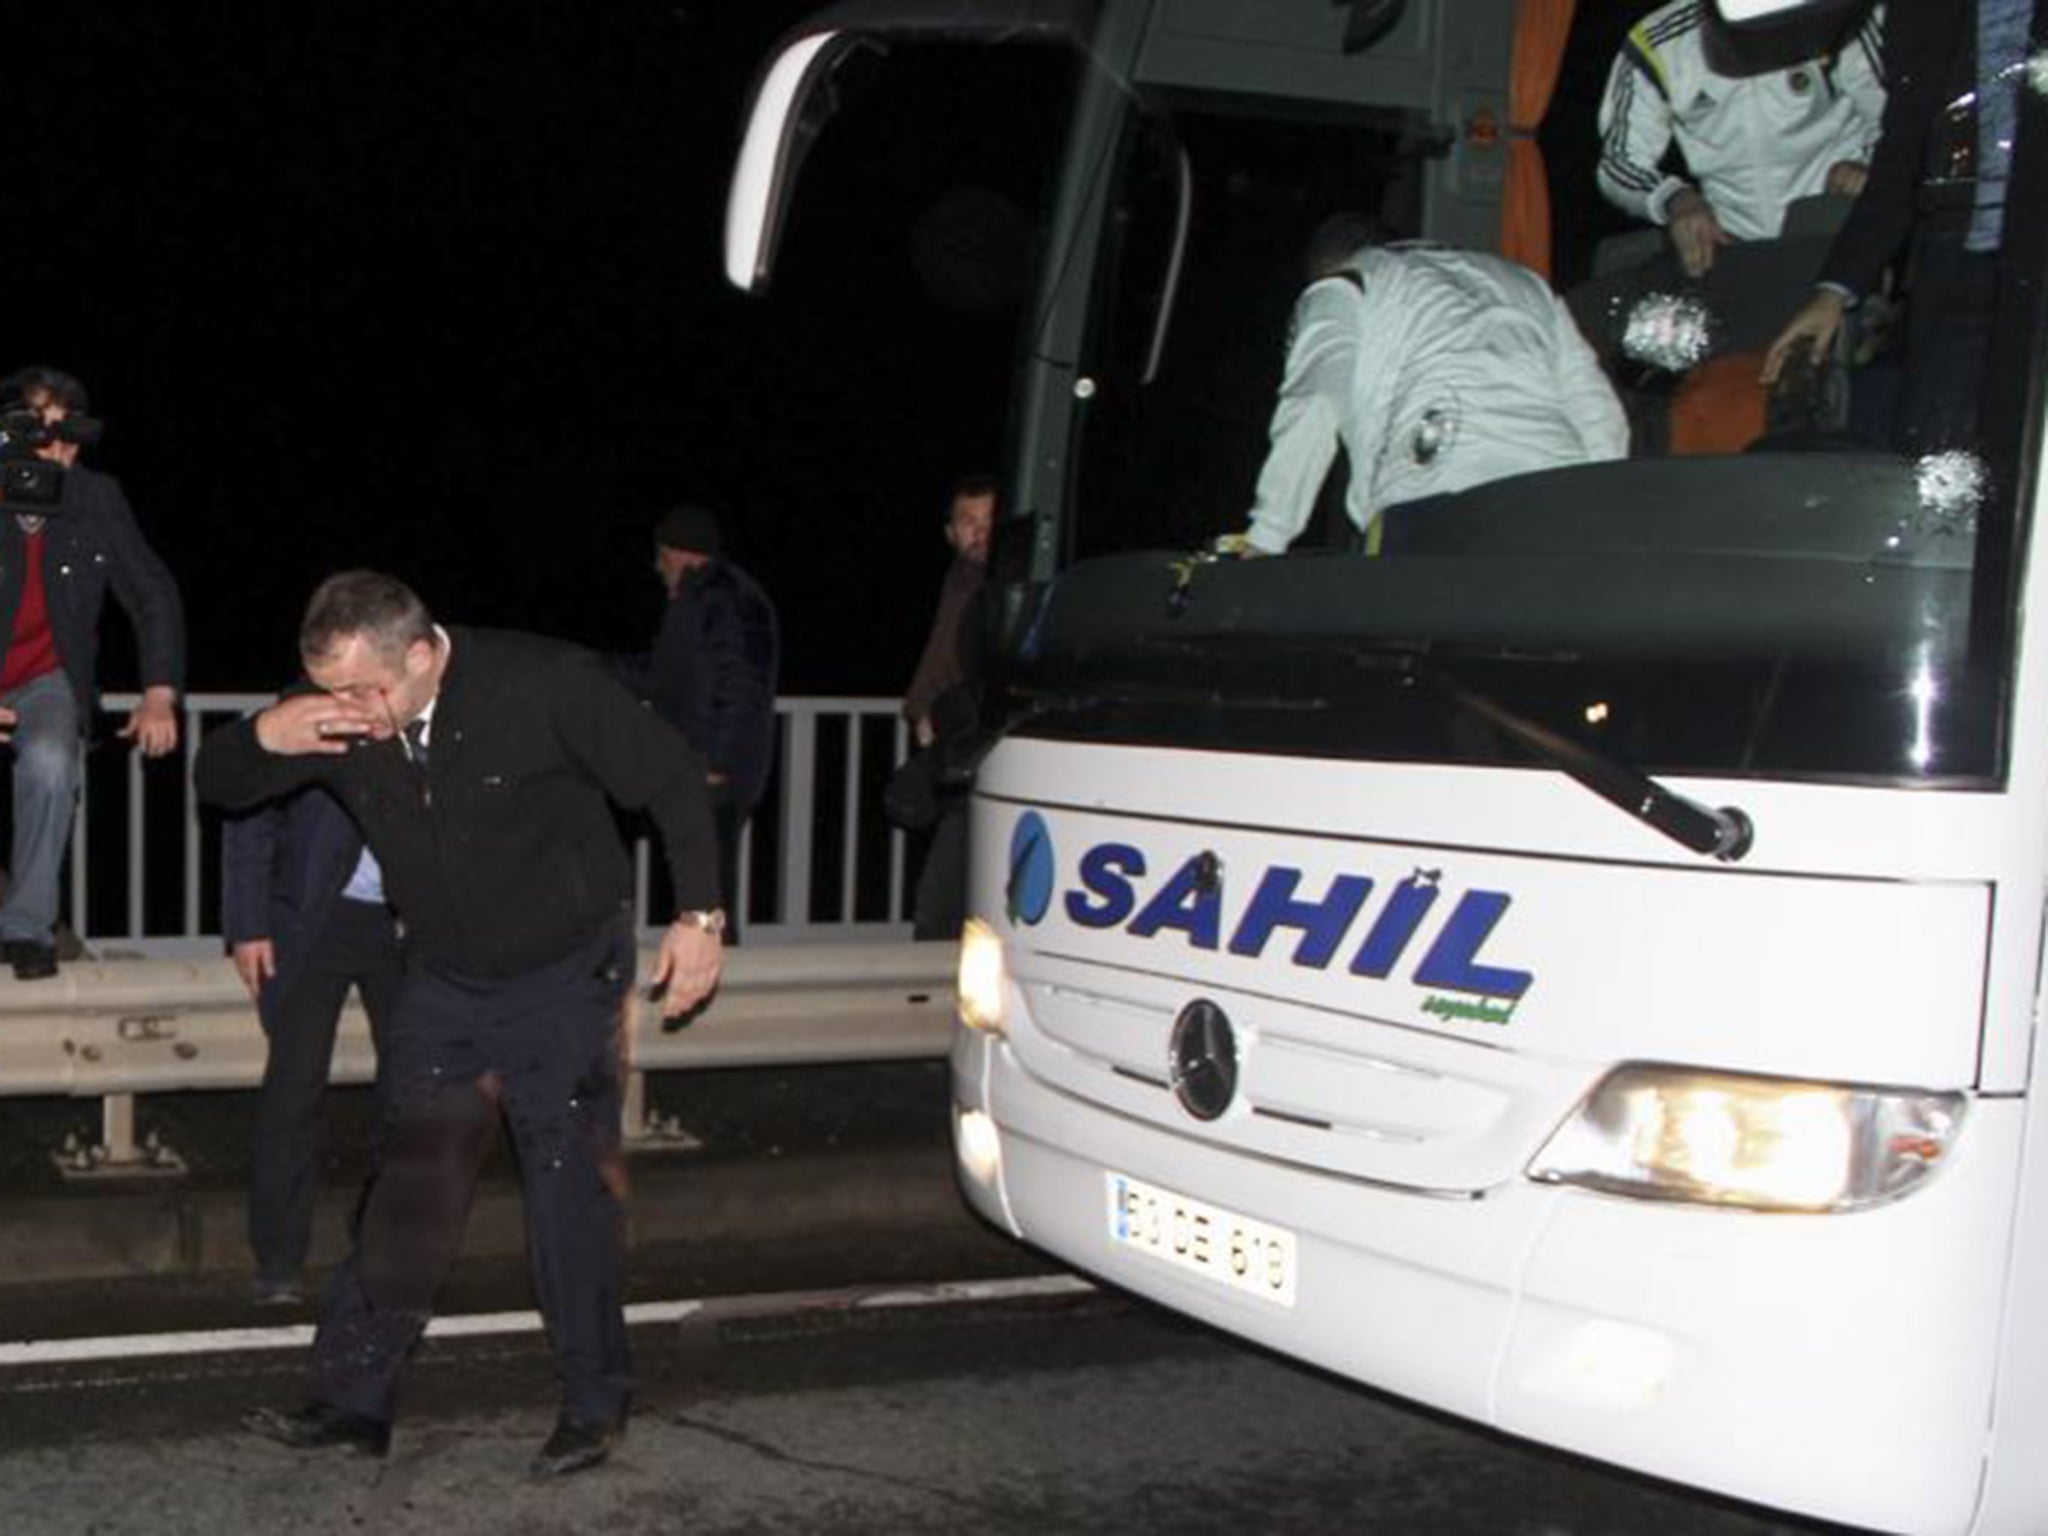 The Fenerbache bus was attacked by an assailant with a shotgun following the team's 5-1 win over the Black Sea side Caykur Rizespor